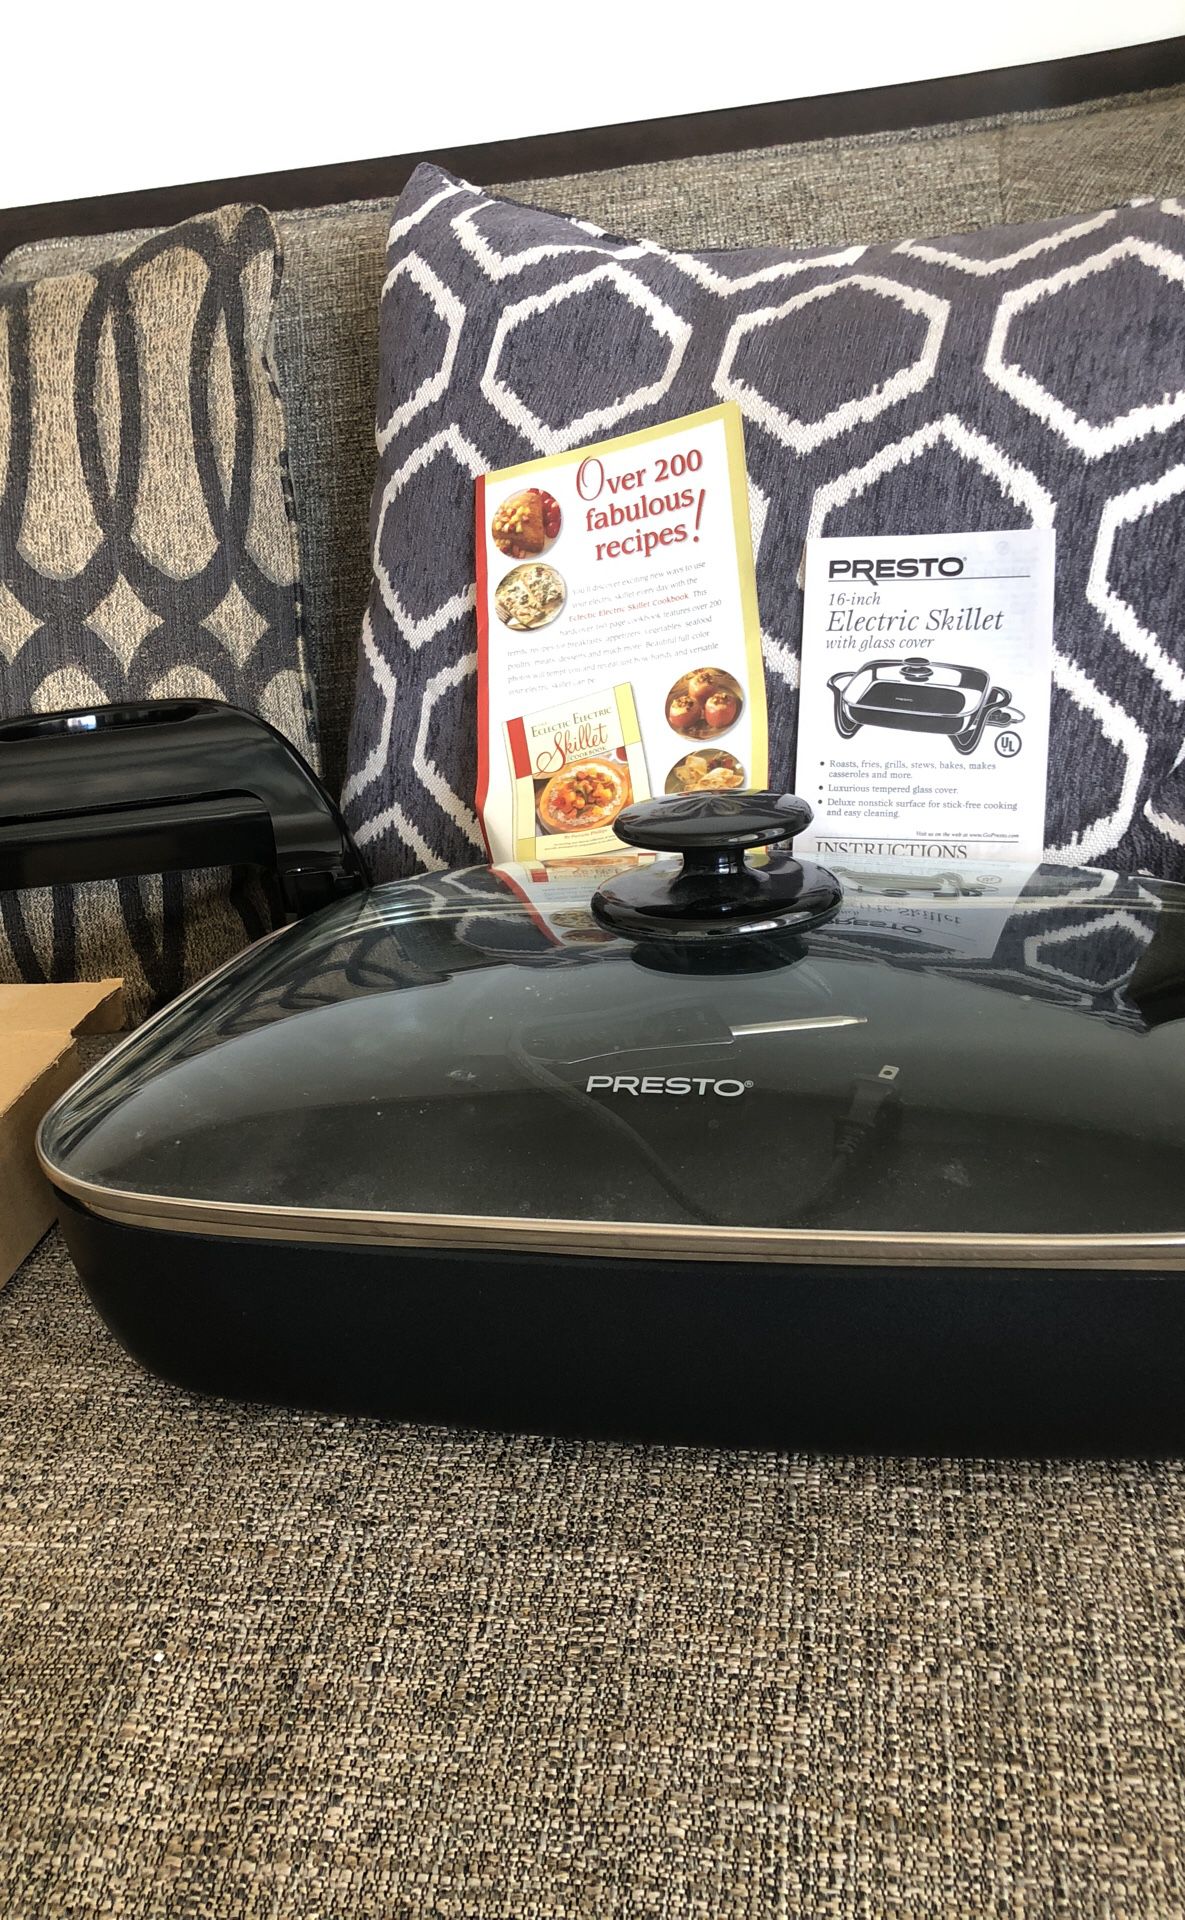 Presto Electric Skillet. Please see all the pictures and read the description